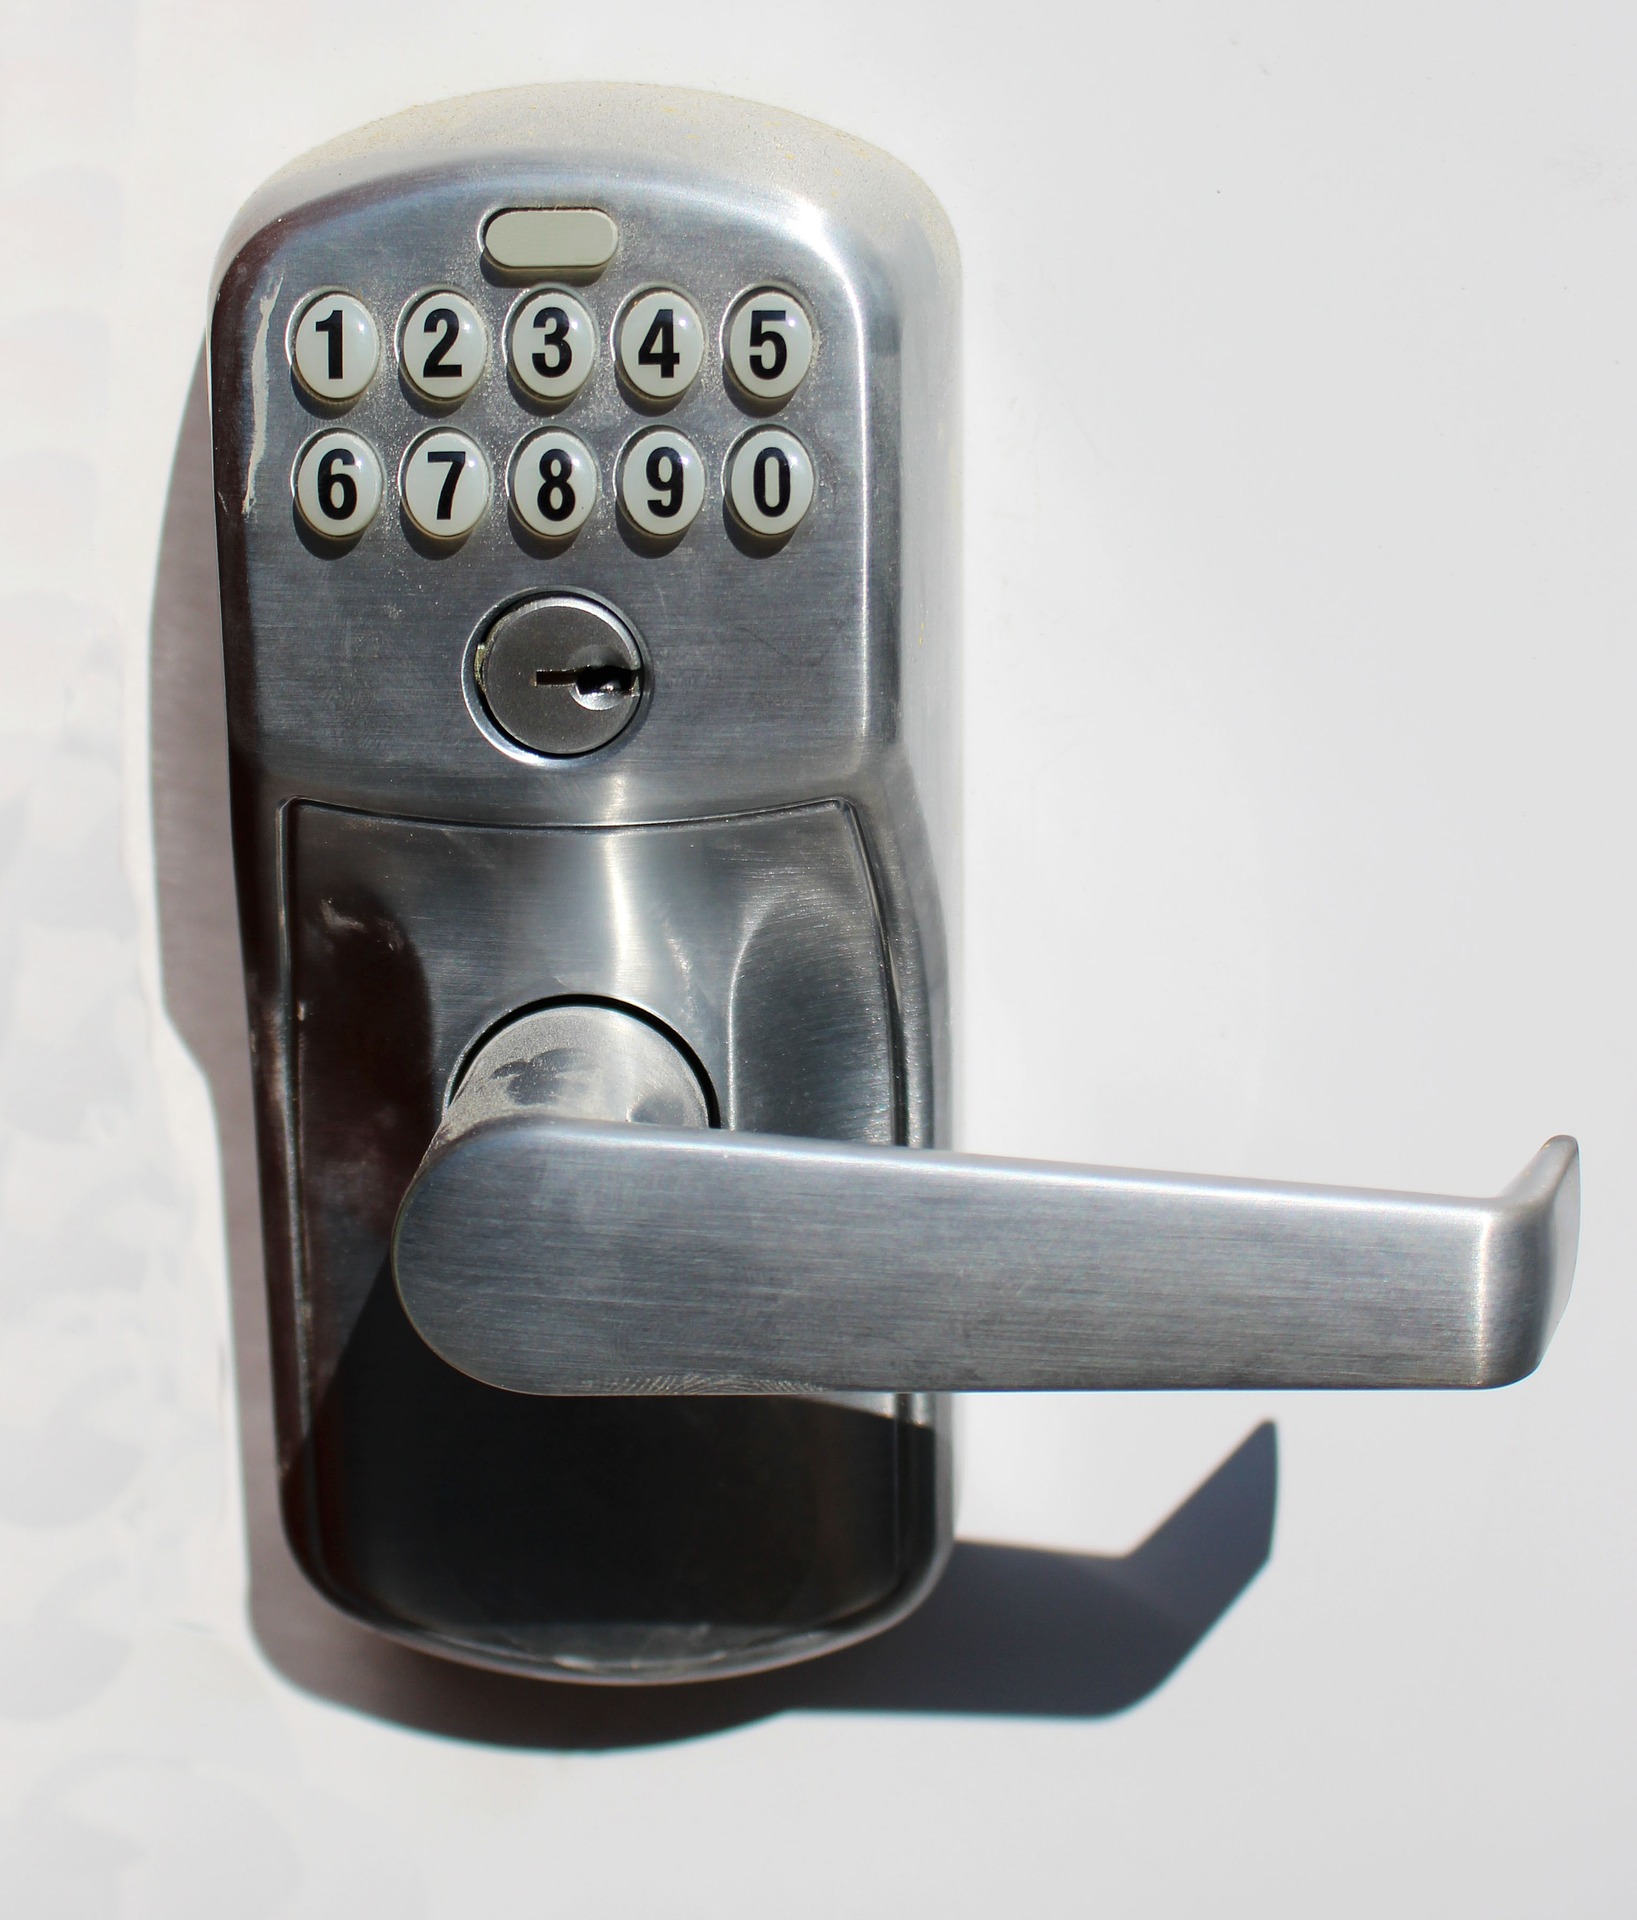 How to Factory Reset Schlage Smart Lock Deadbolts?